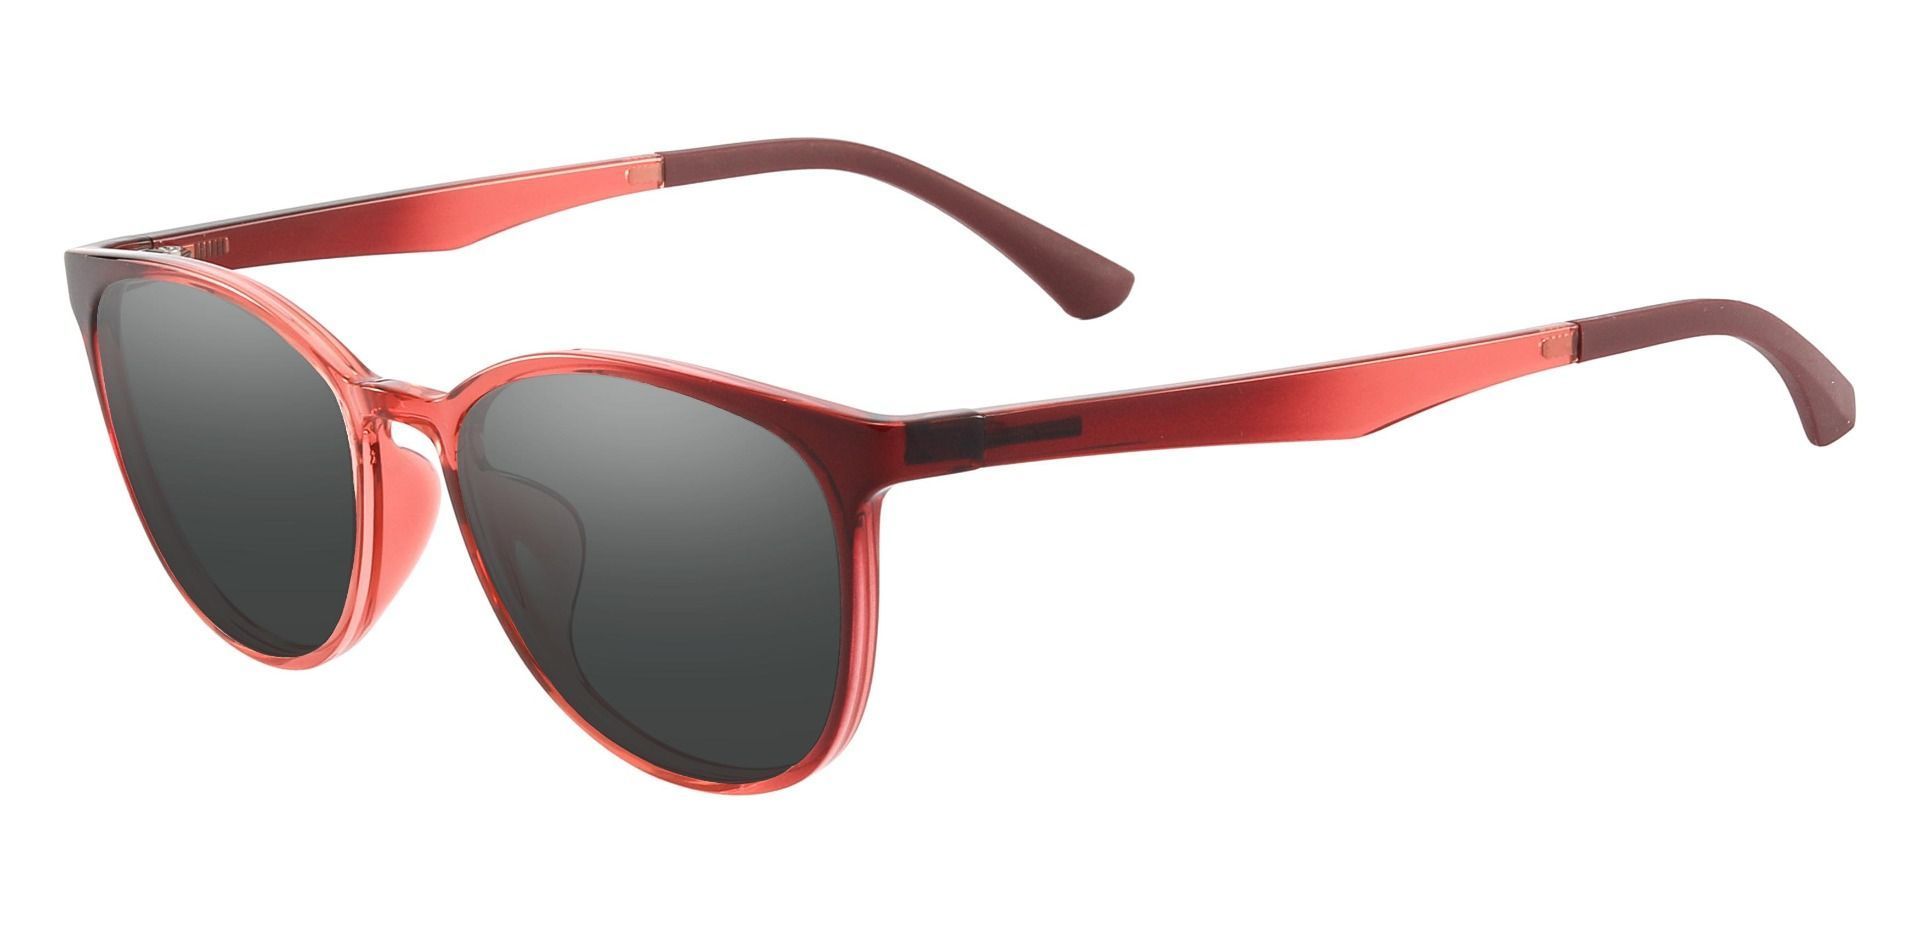 Pembroke Oval Non-Rx Sunglasses - Pink Frame With Gray Lenses